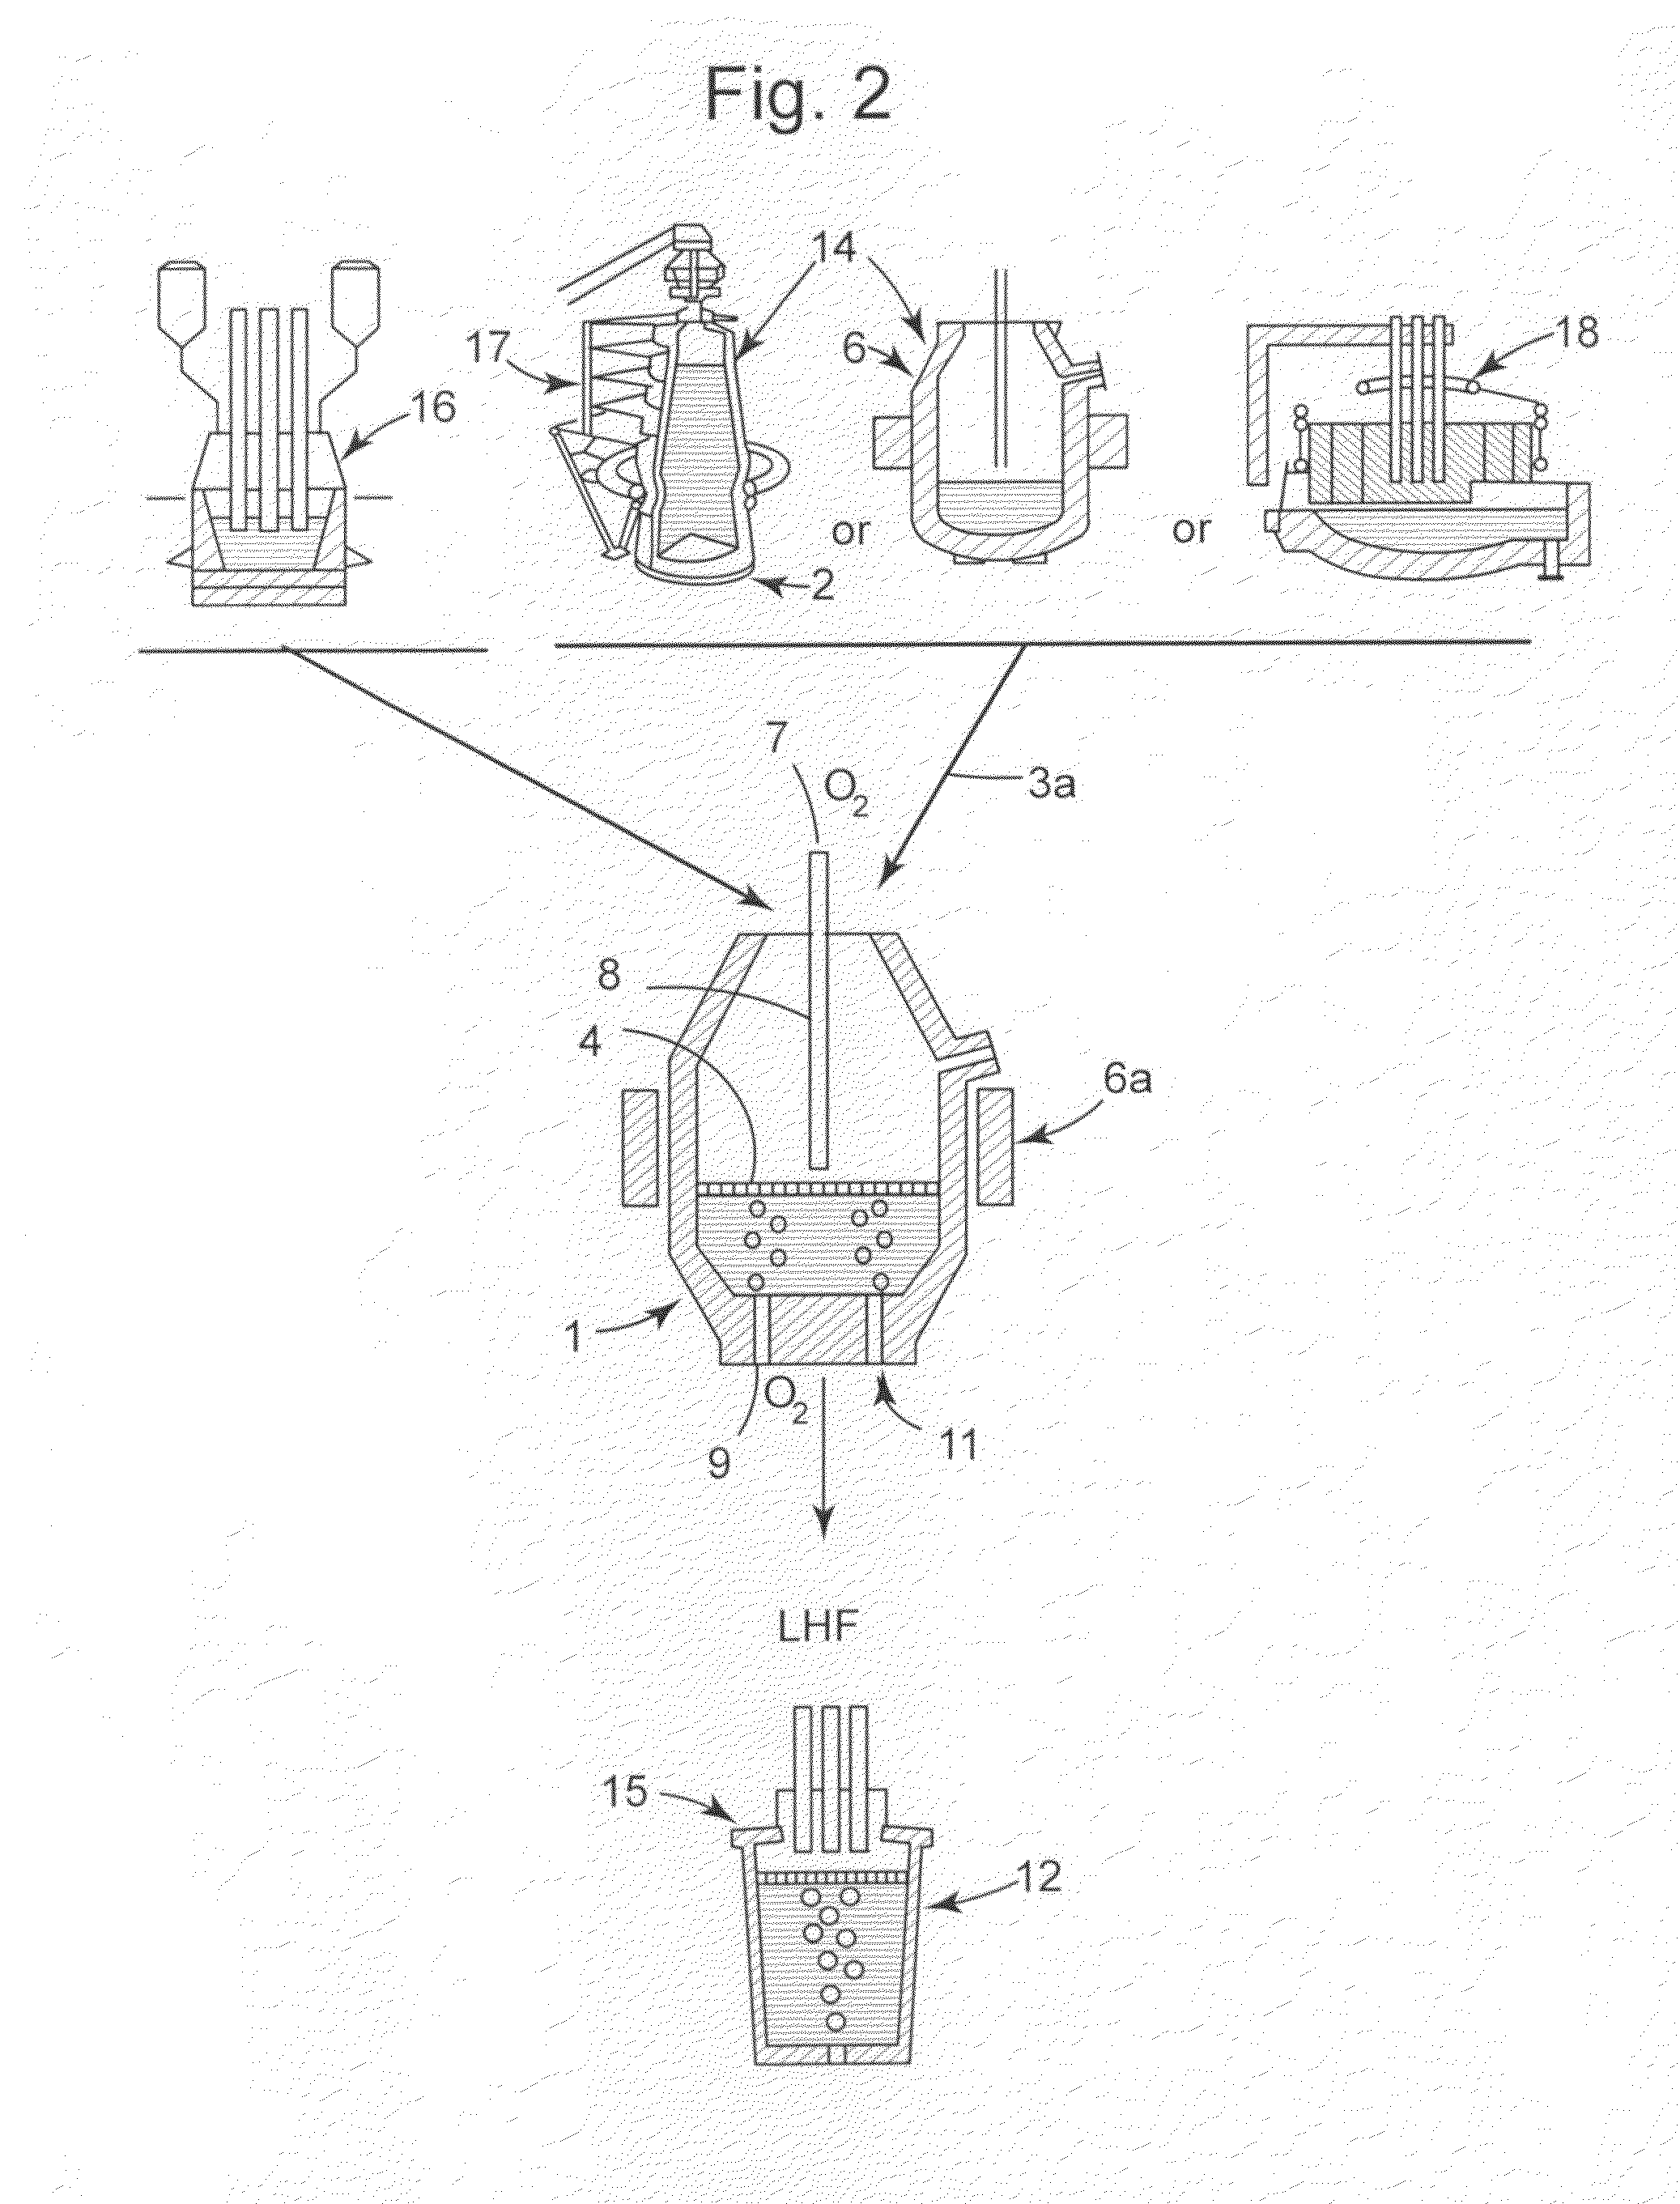 Method of producing steel with high manganese and low carbon content